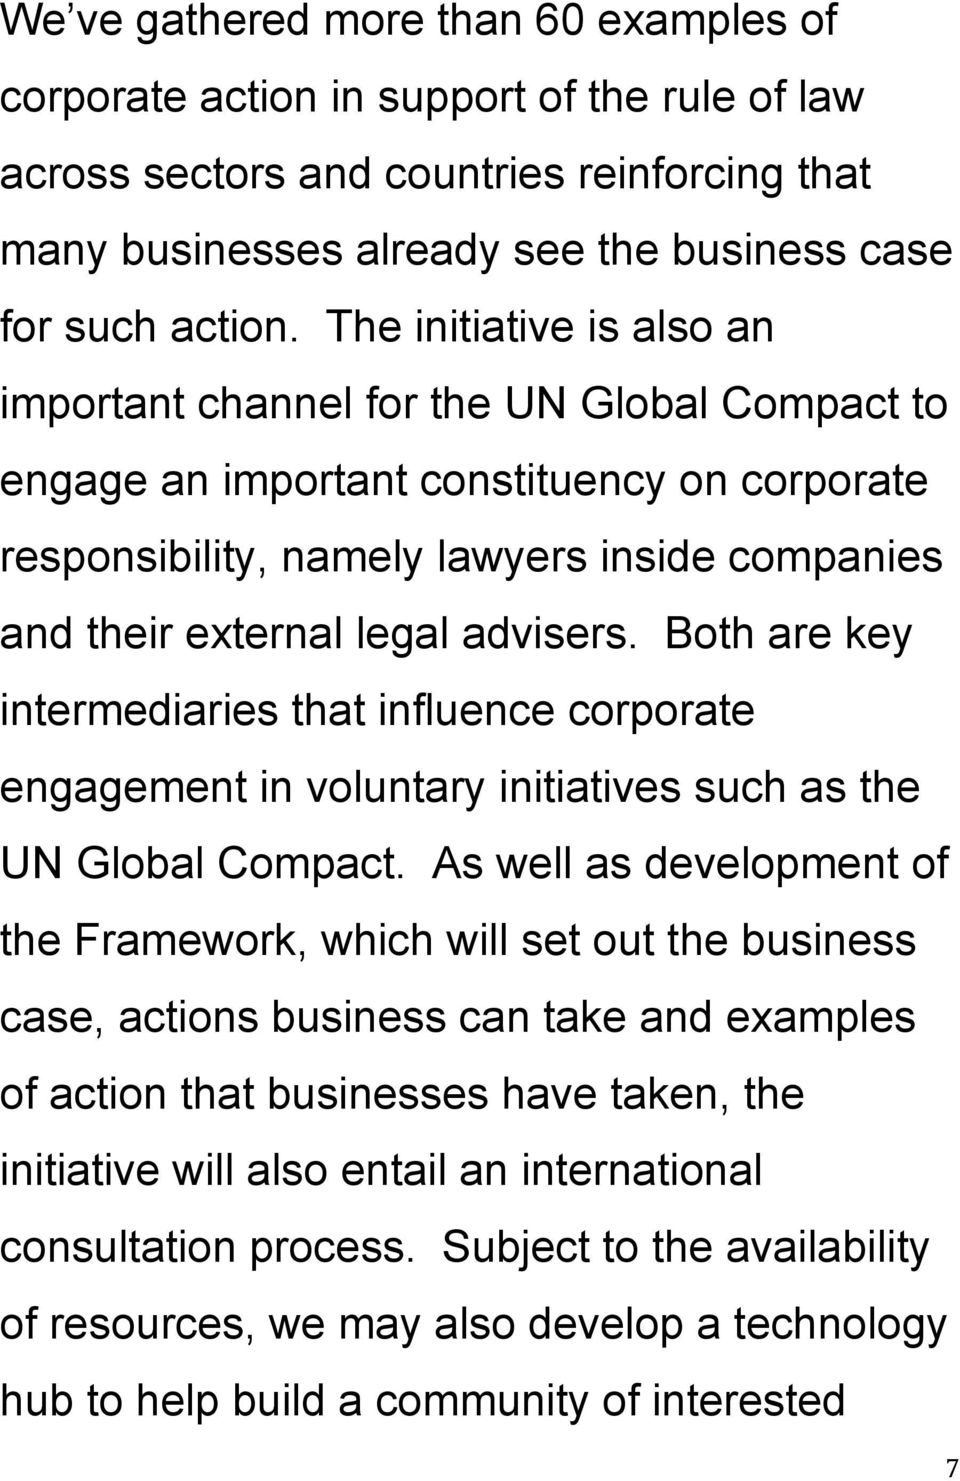 advisers. Both are key intermediaries that influence corporate engagement in voluntary initiatives such as the UN Global Compact.